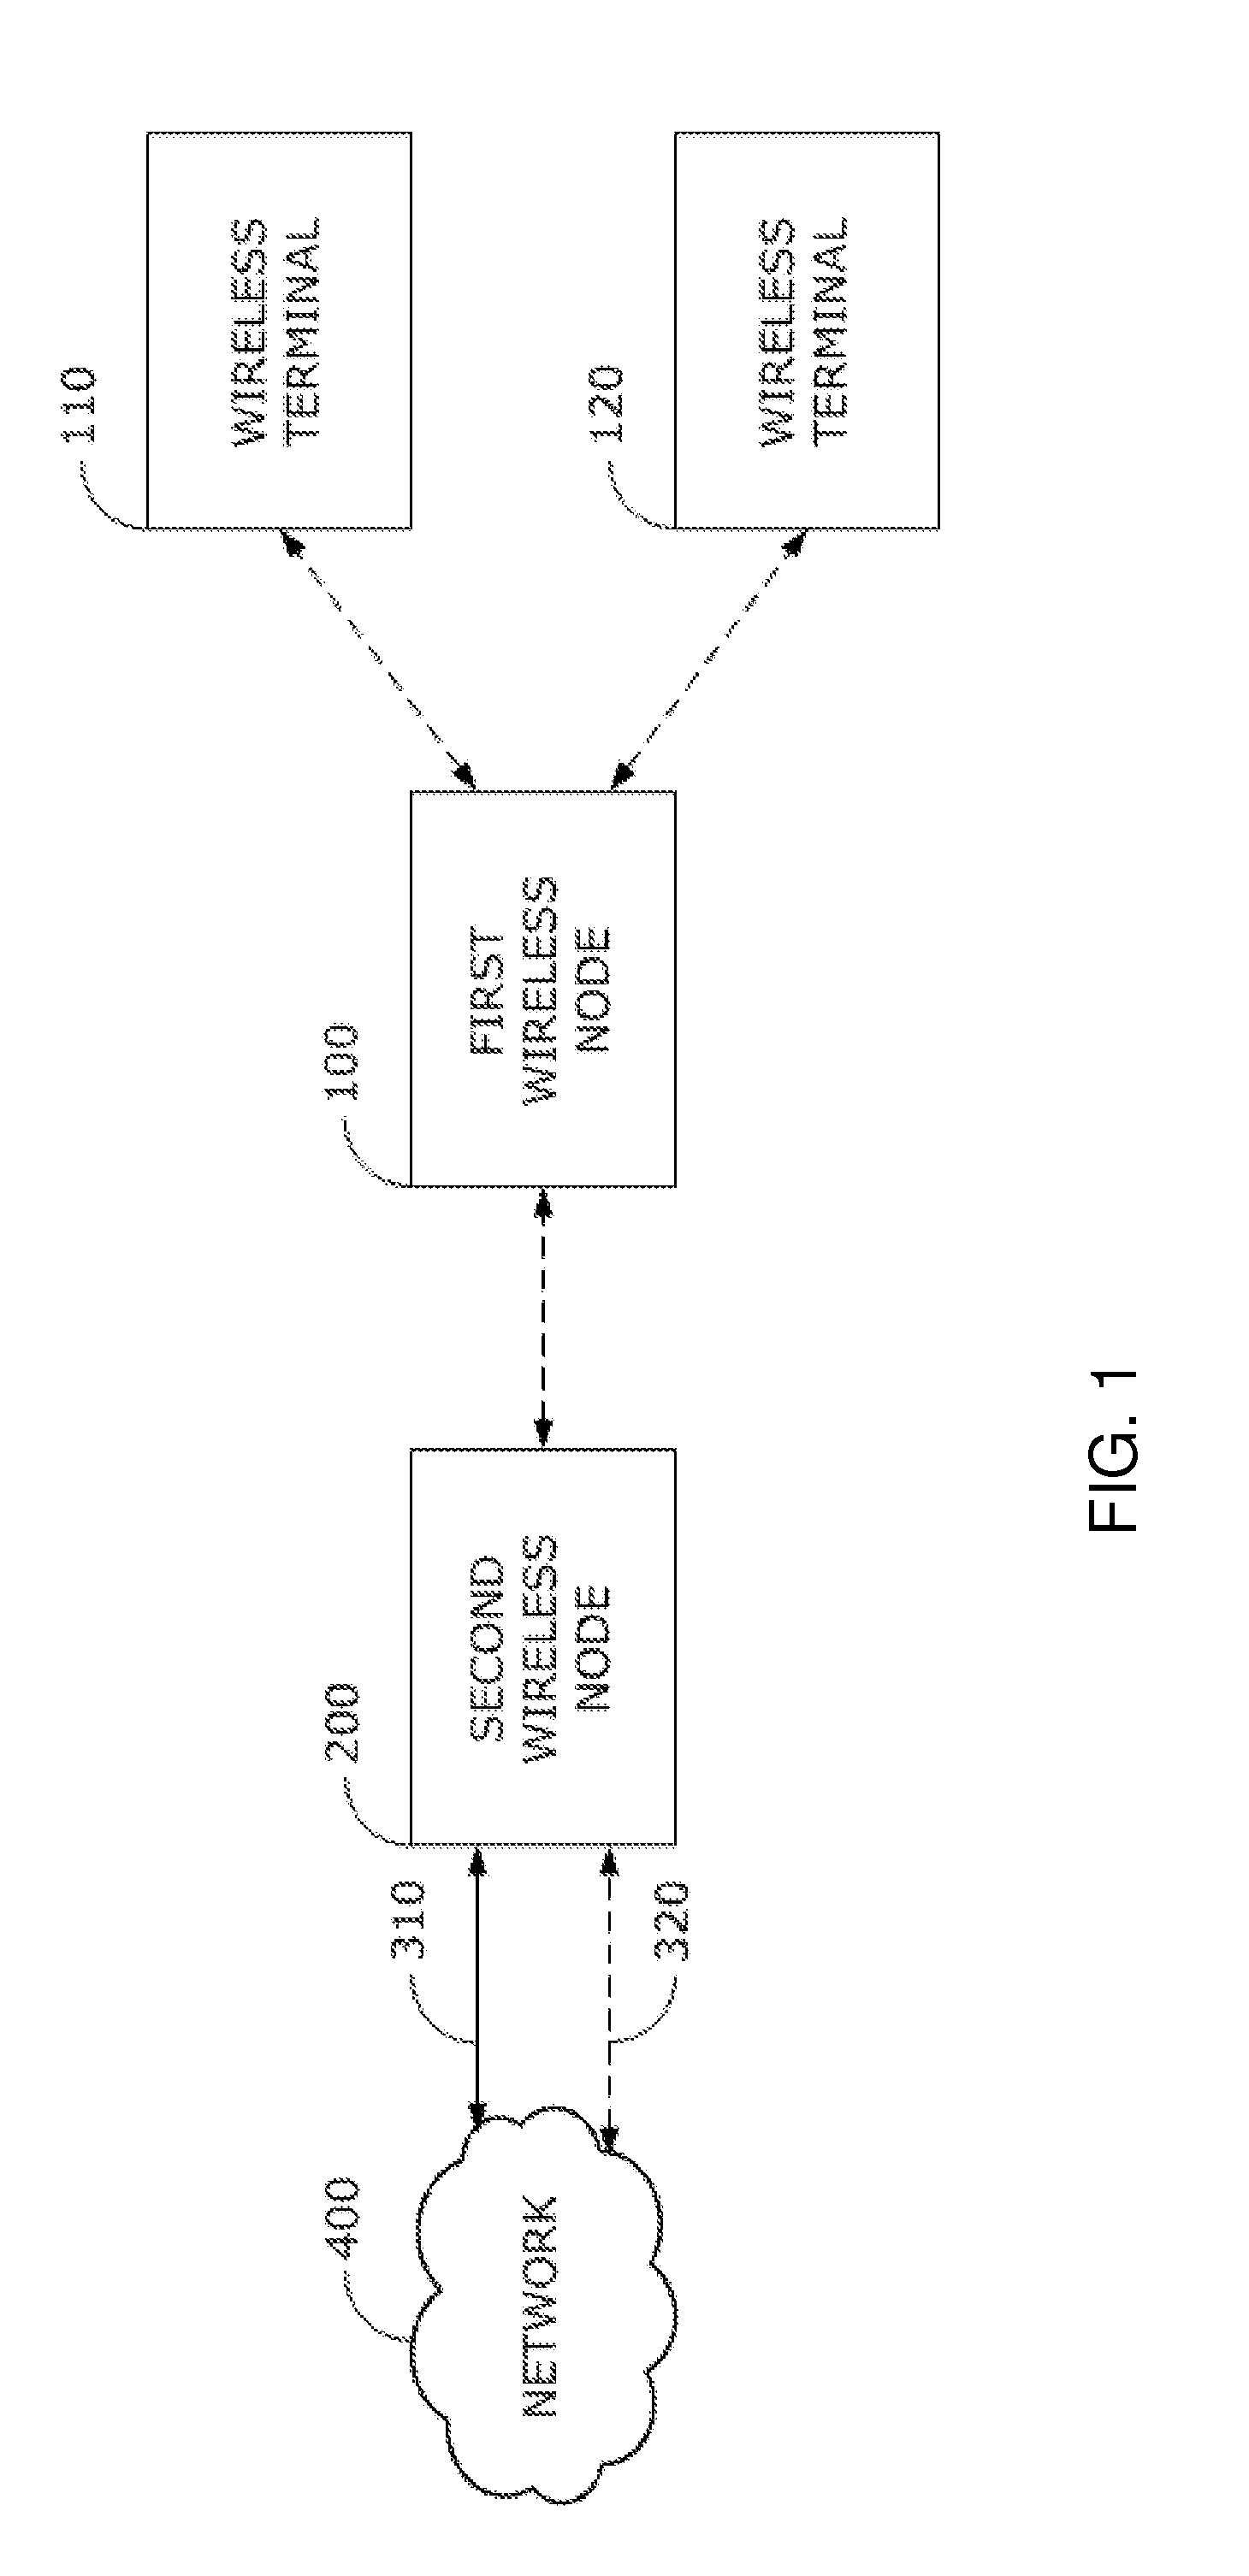 System and method for wireless node connection